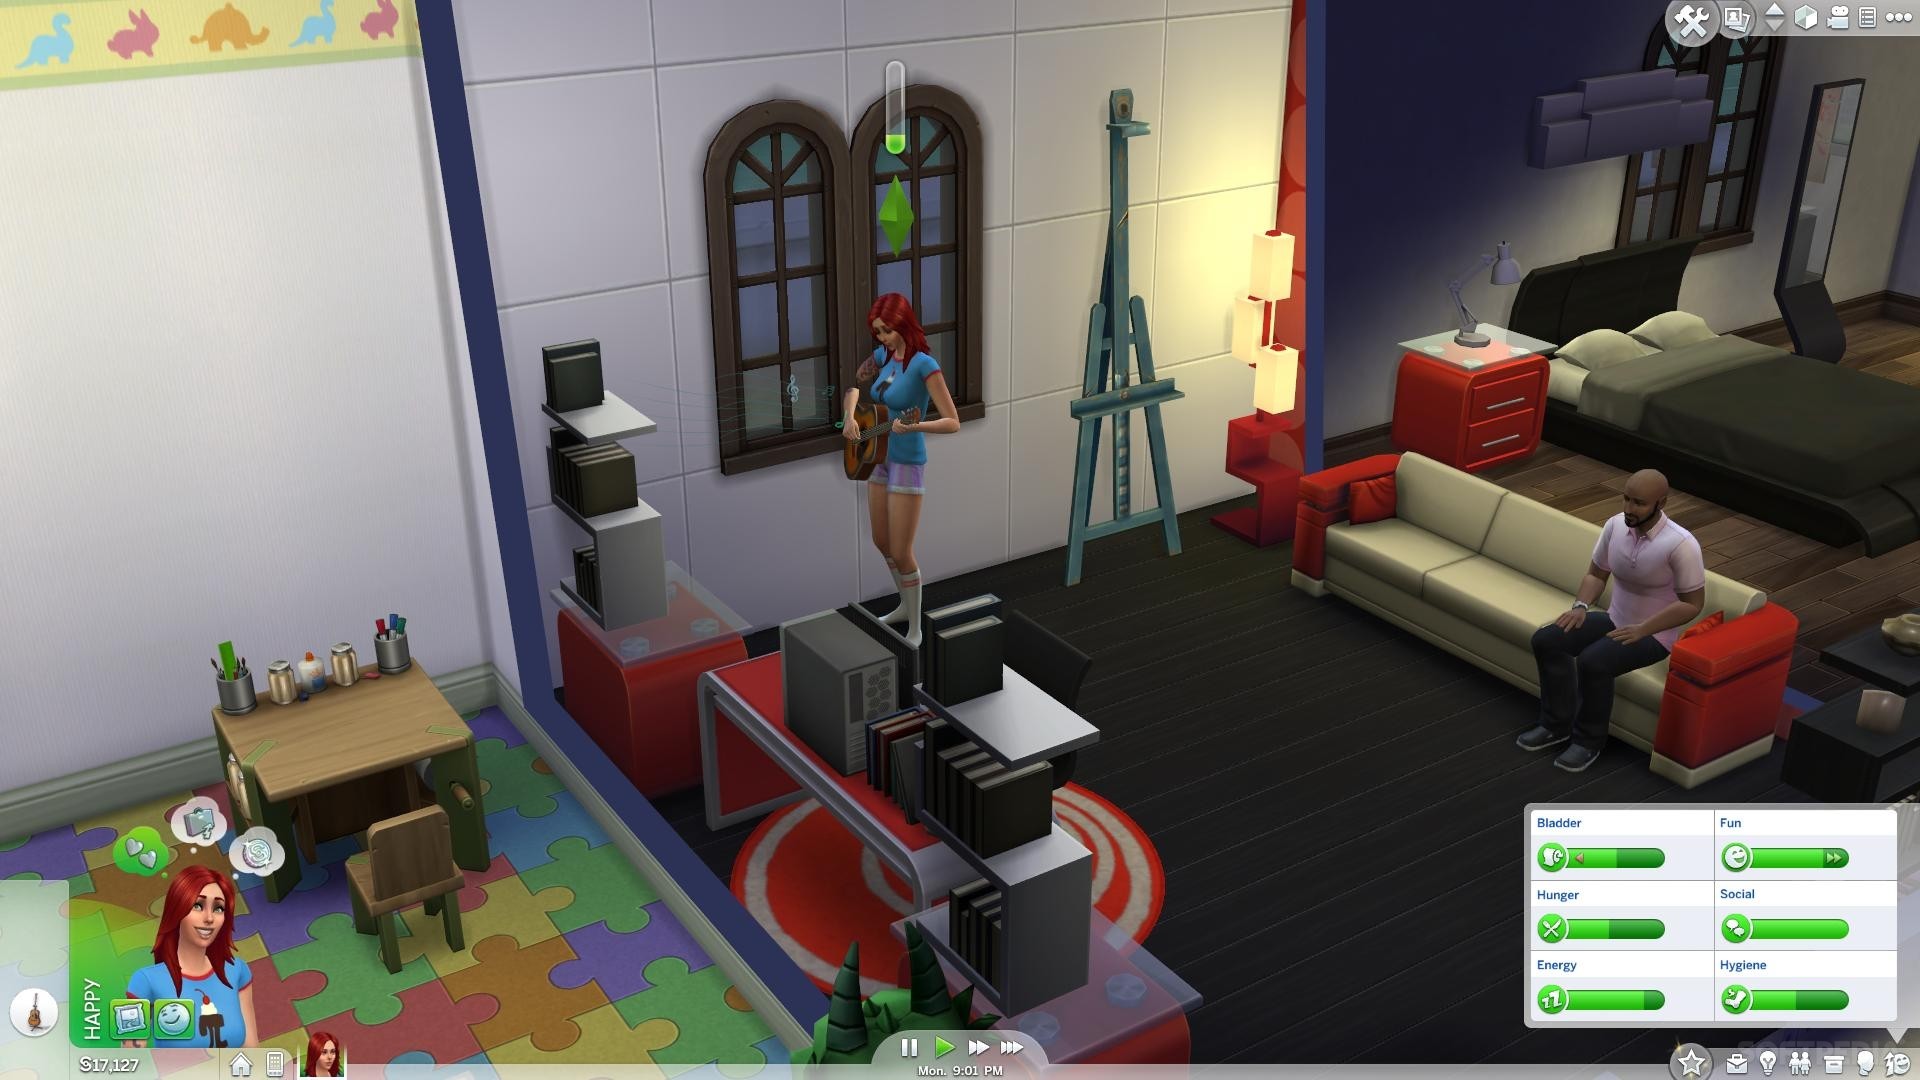 The Sims 4 Is Free To Download And Play On Pc For 48 Hours Via Origin